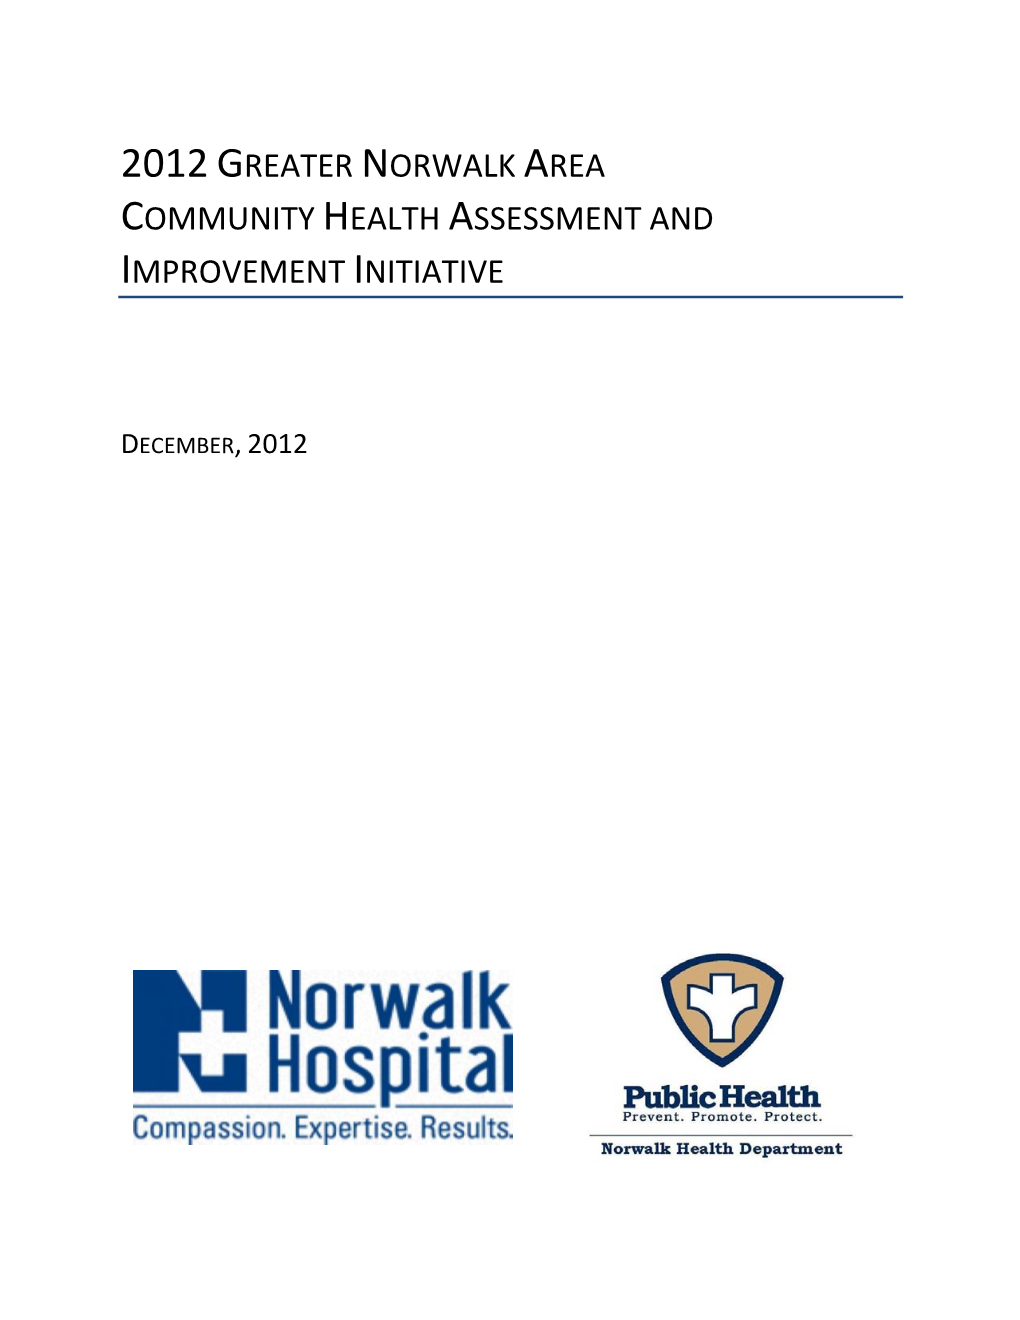 2012Greater Norwalk Area Community Health Assessment And